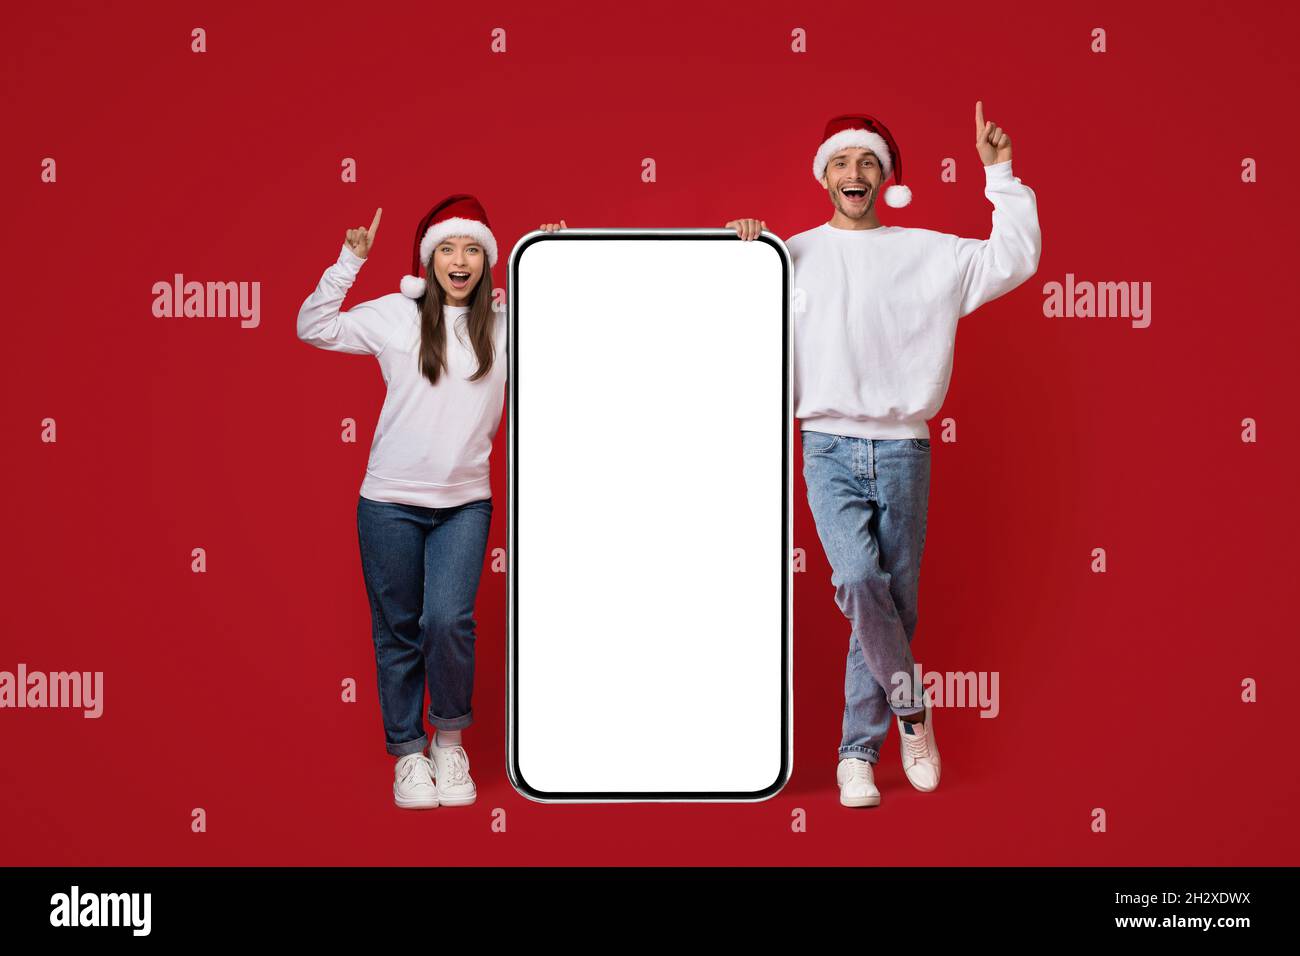 Chistmas Idea Concept. Couple In Santa Hats Standing With Big Blank Smartphone Stock Photo